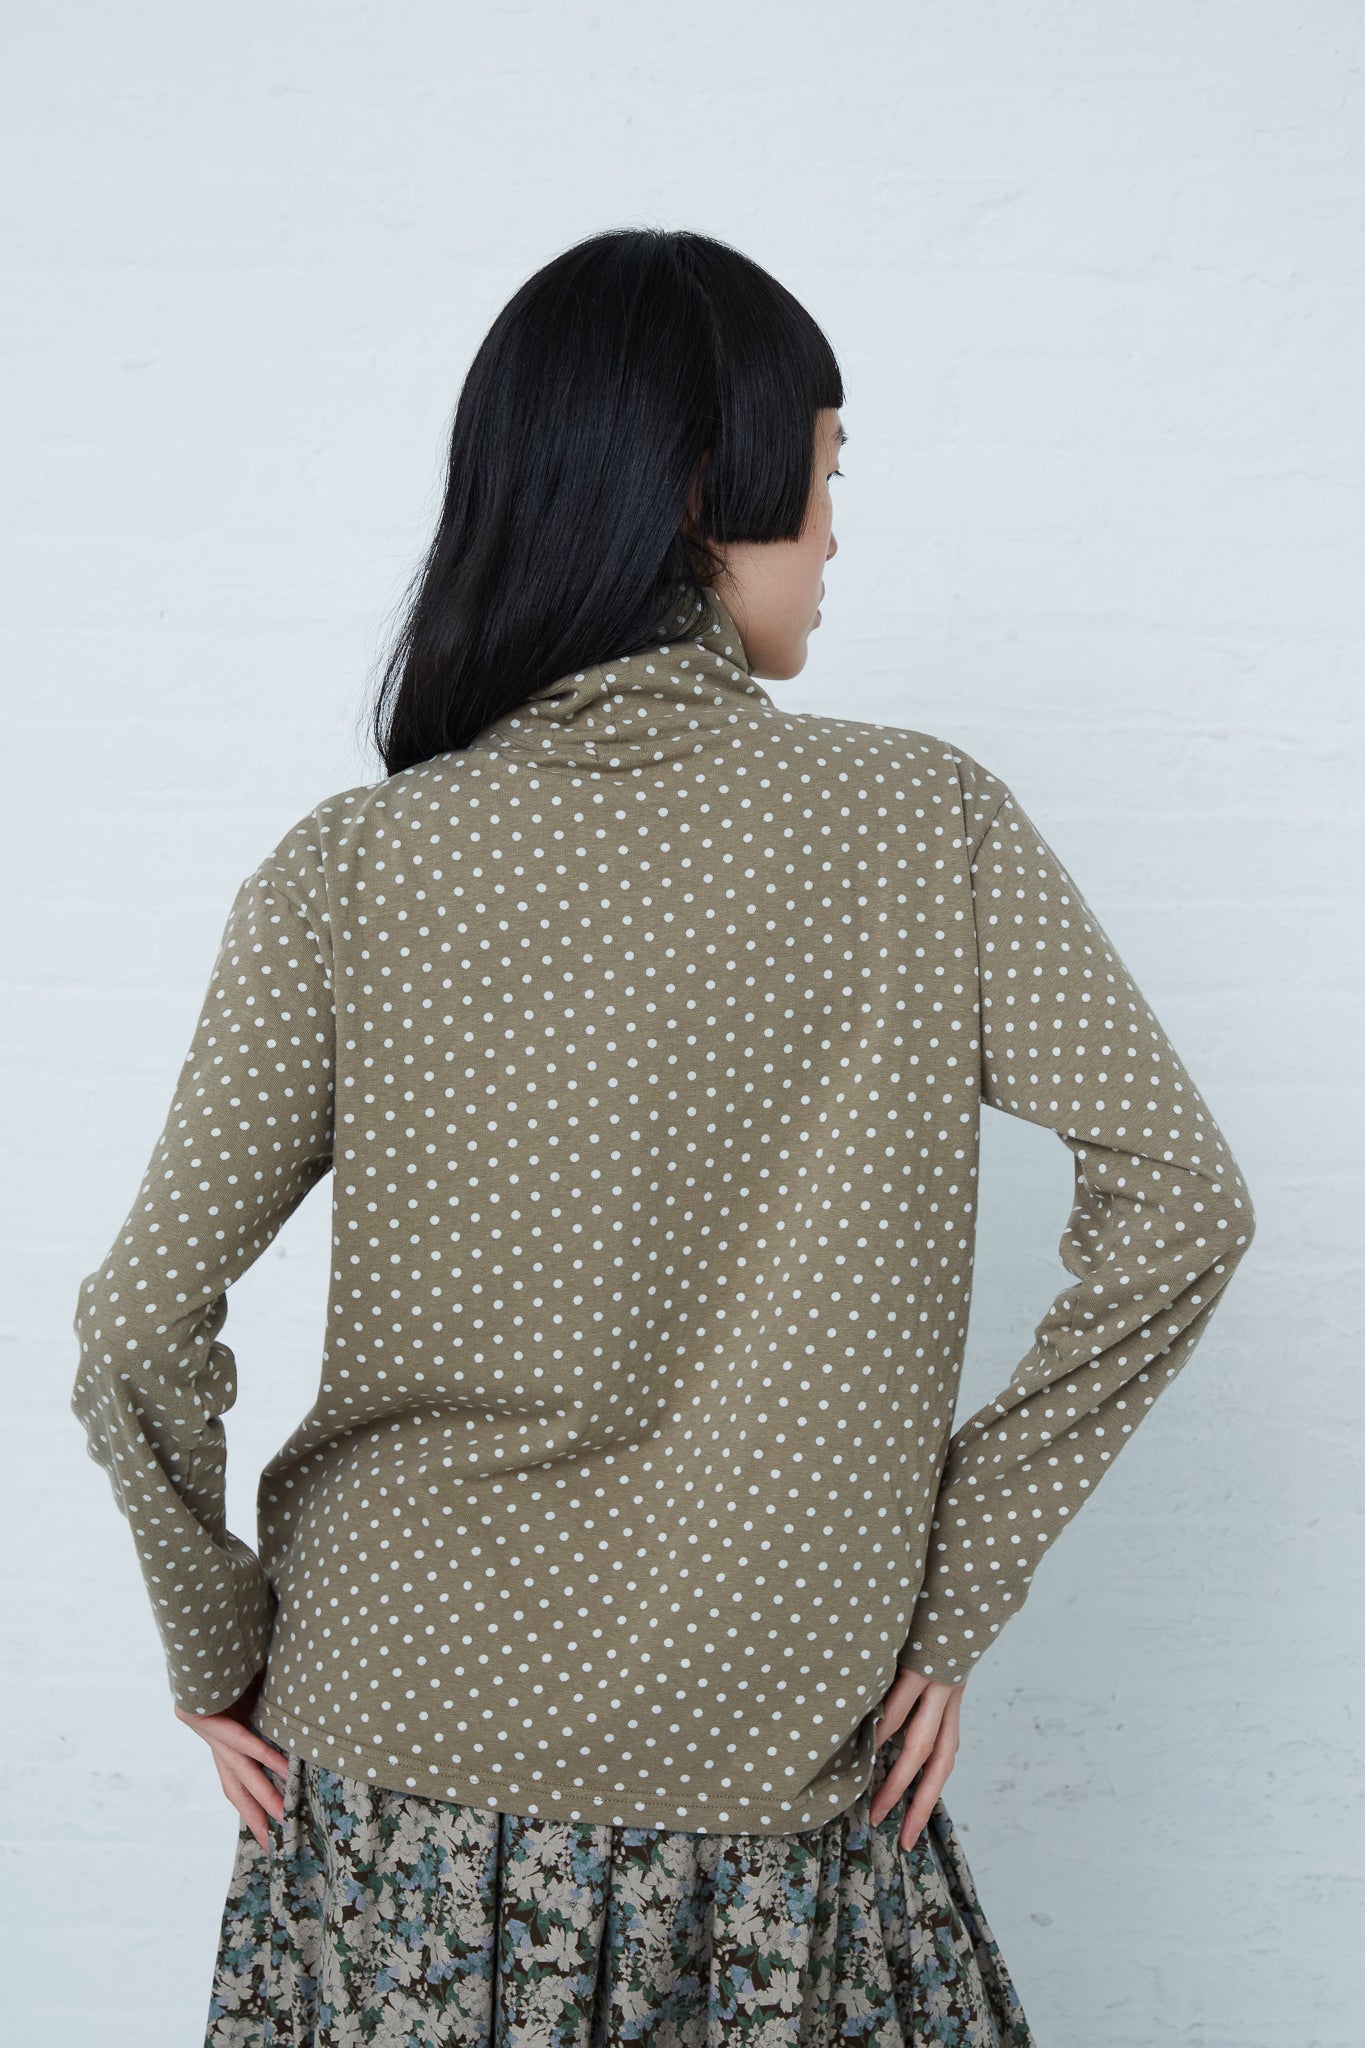 A woman wearing an Ichi Cotton Polka Dot Pullover Turtleneck in Khaki styled with a relaxed fit.